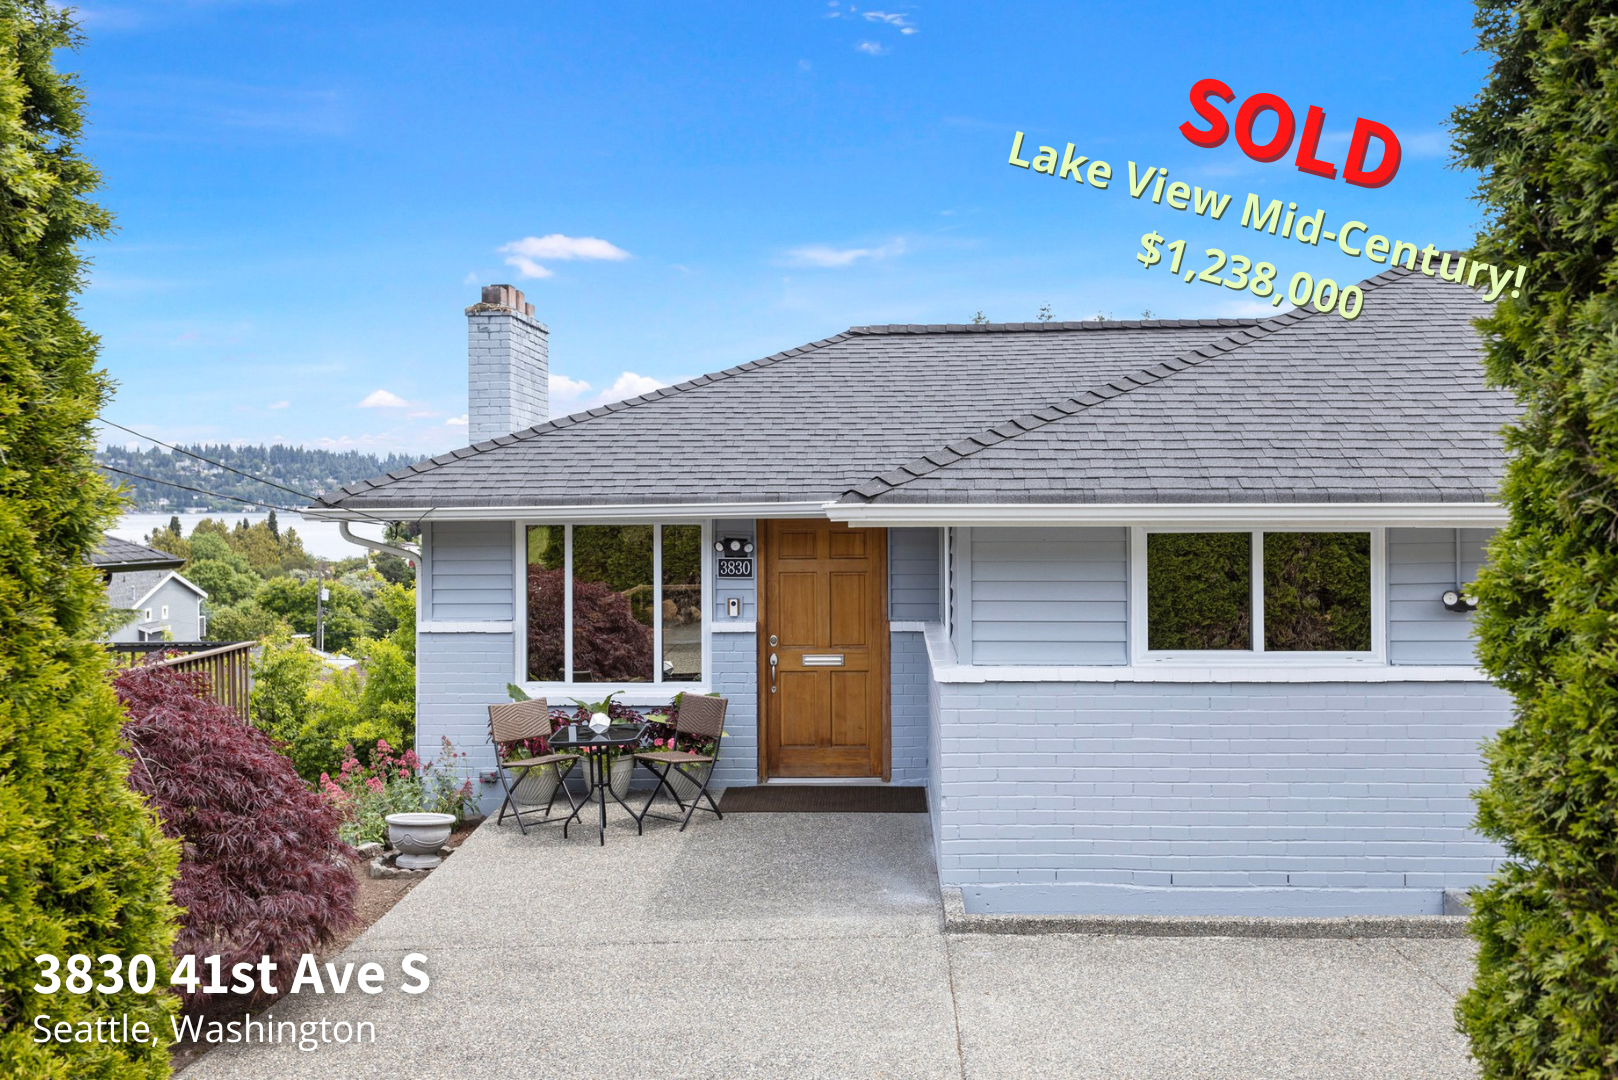 SOLD - 3830 41st Ave S